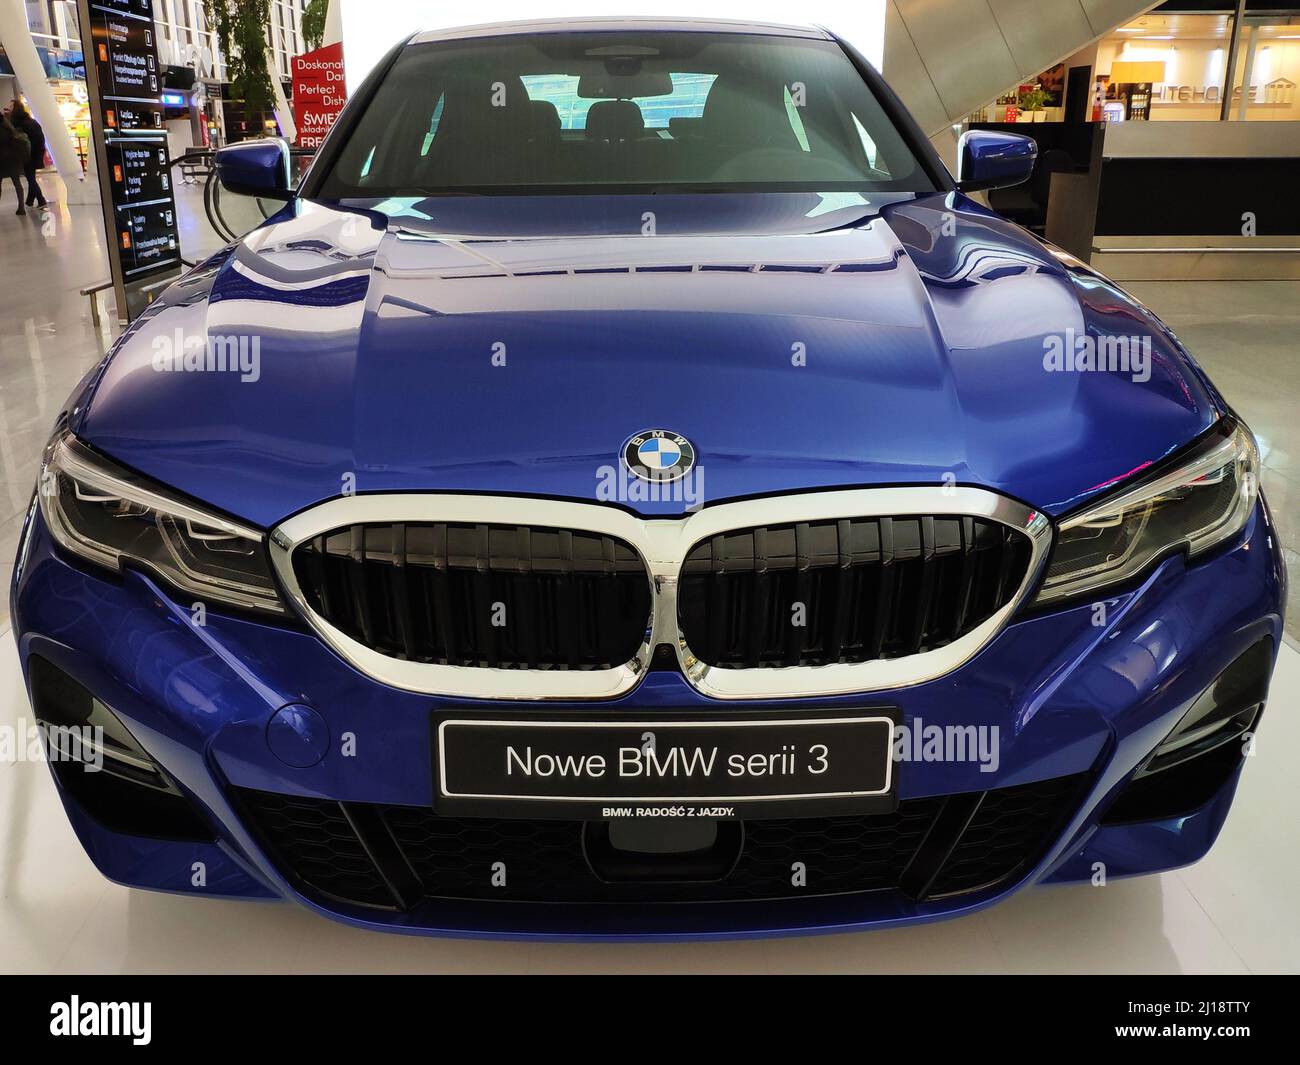 Wroclaw, Poland - Nov 15, 2019: BMW Serie 3 at display stand Stock Photo